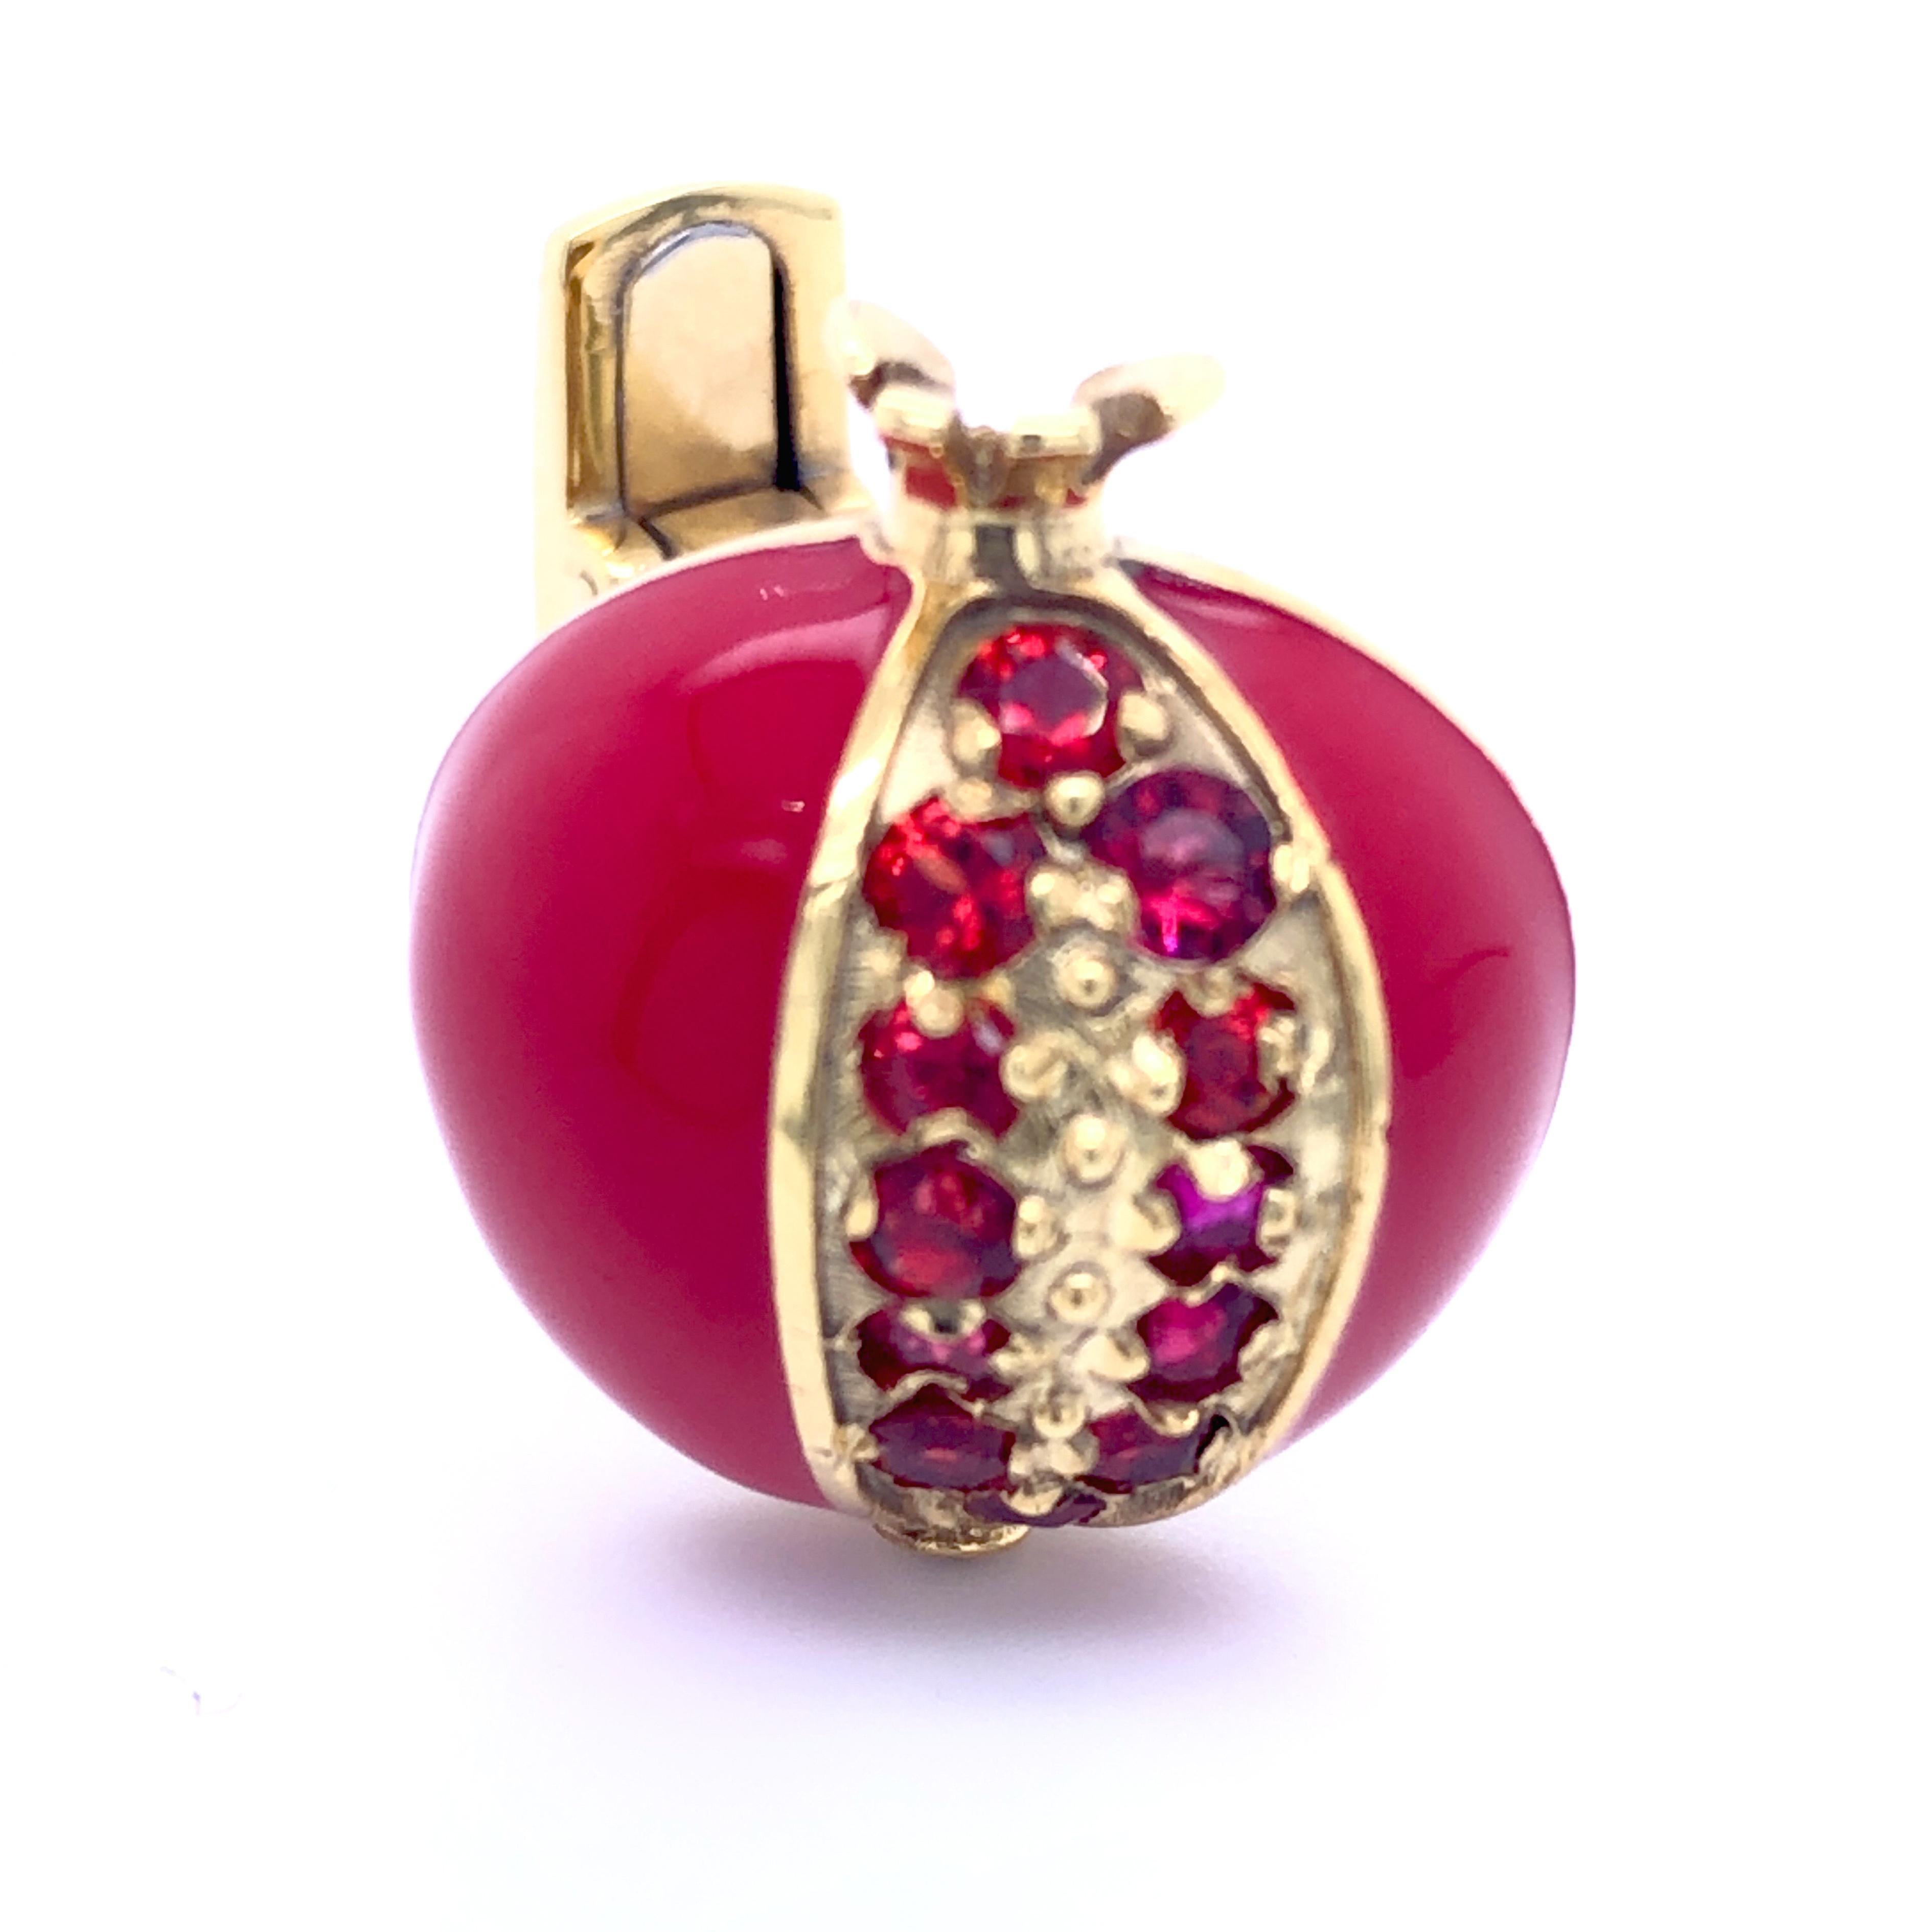 Unique, absolutely chic, Red Hand Enameled Pomegranate Shaped Cufflinks featuring 2.05 Carat Natural Ruby  in a yellow gold setting, T-bar back. Since antiquity Pomegranates have symbolized fertility, beauty, power and eternal life.
In our smart